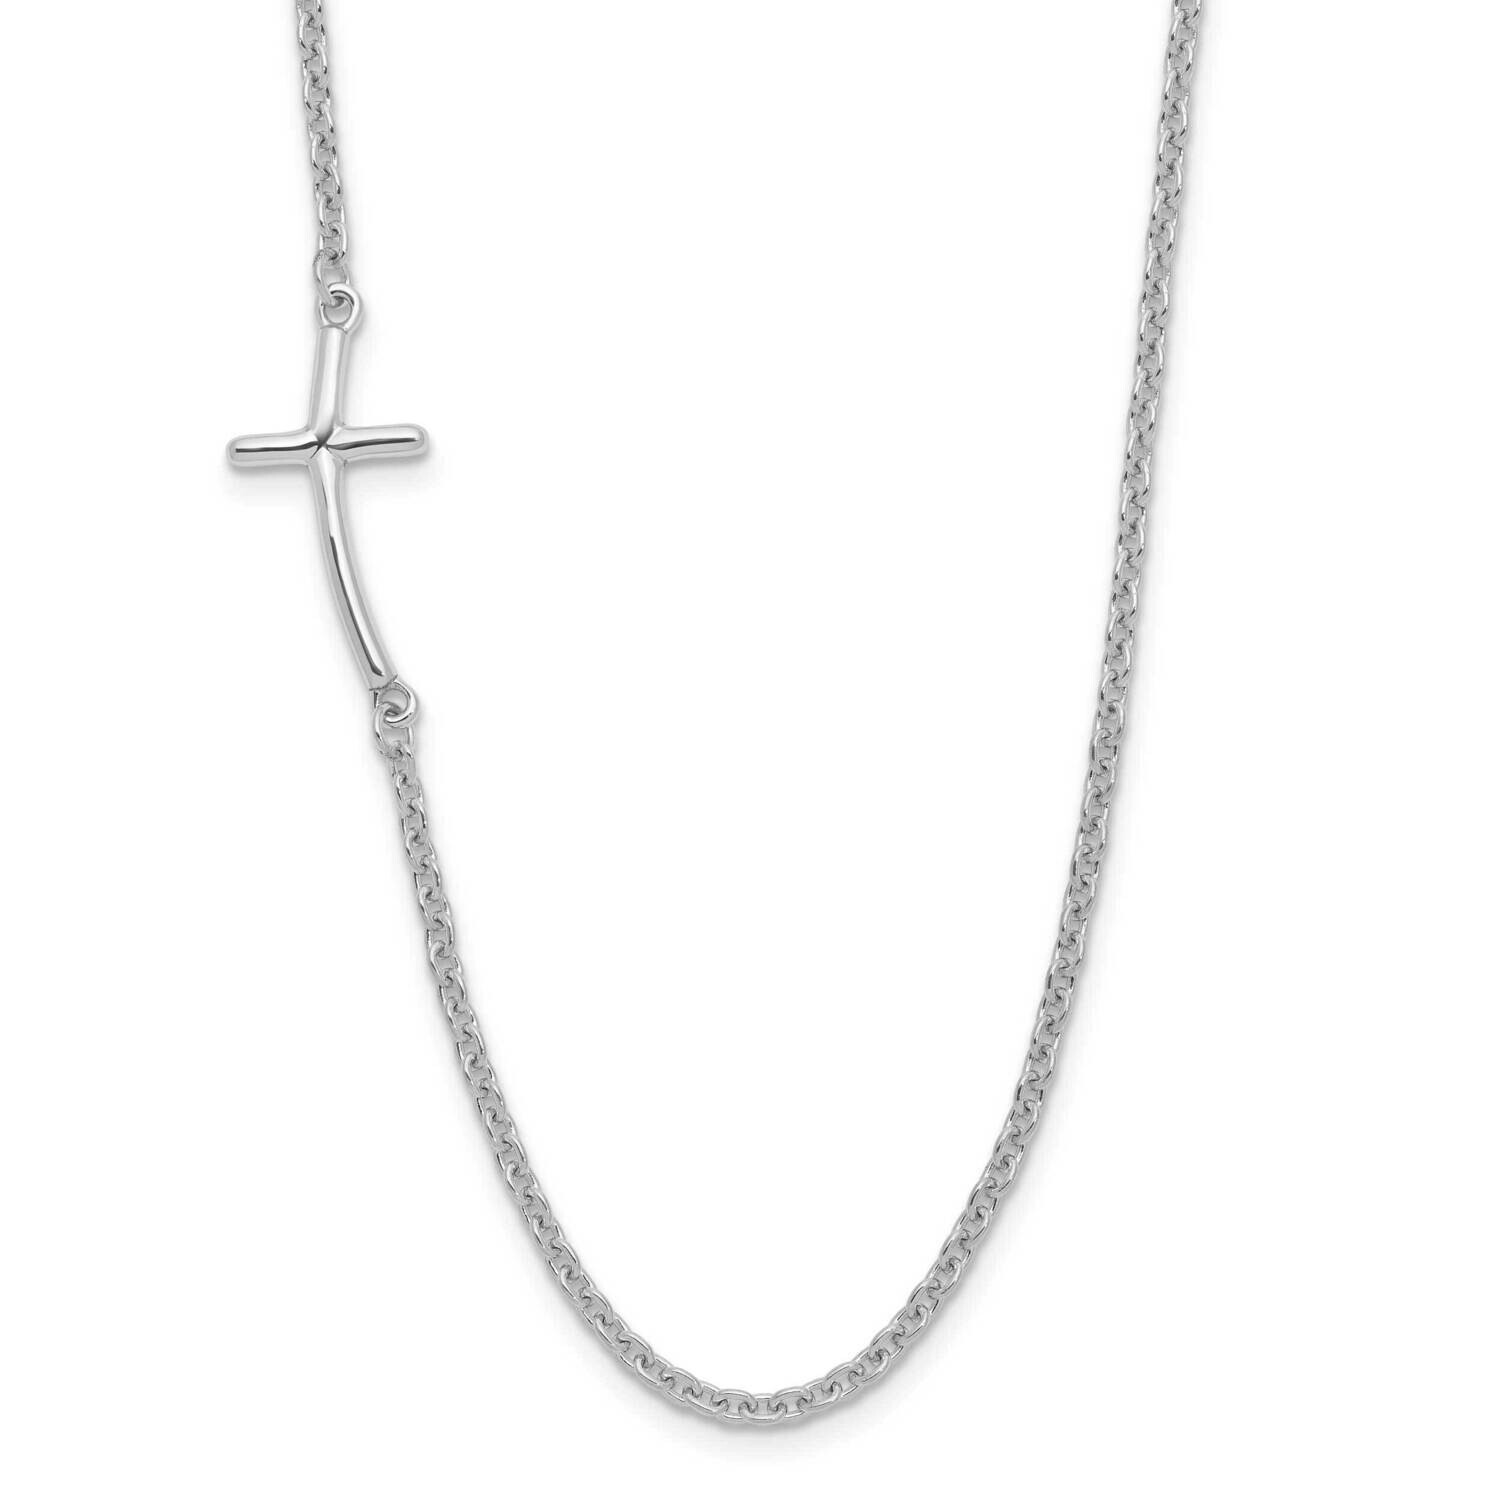 Rh-Plated Small Off-Set Sideways Curved Cross Necklace Sterling Silver QG3465-17